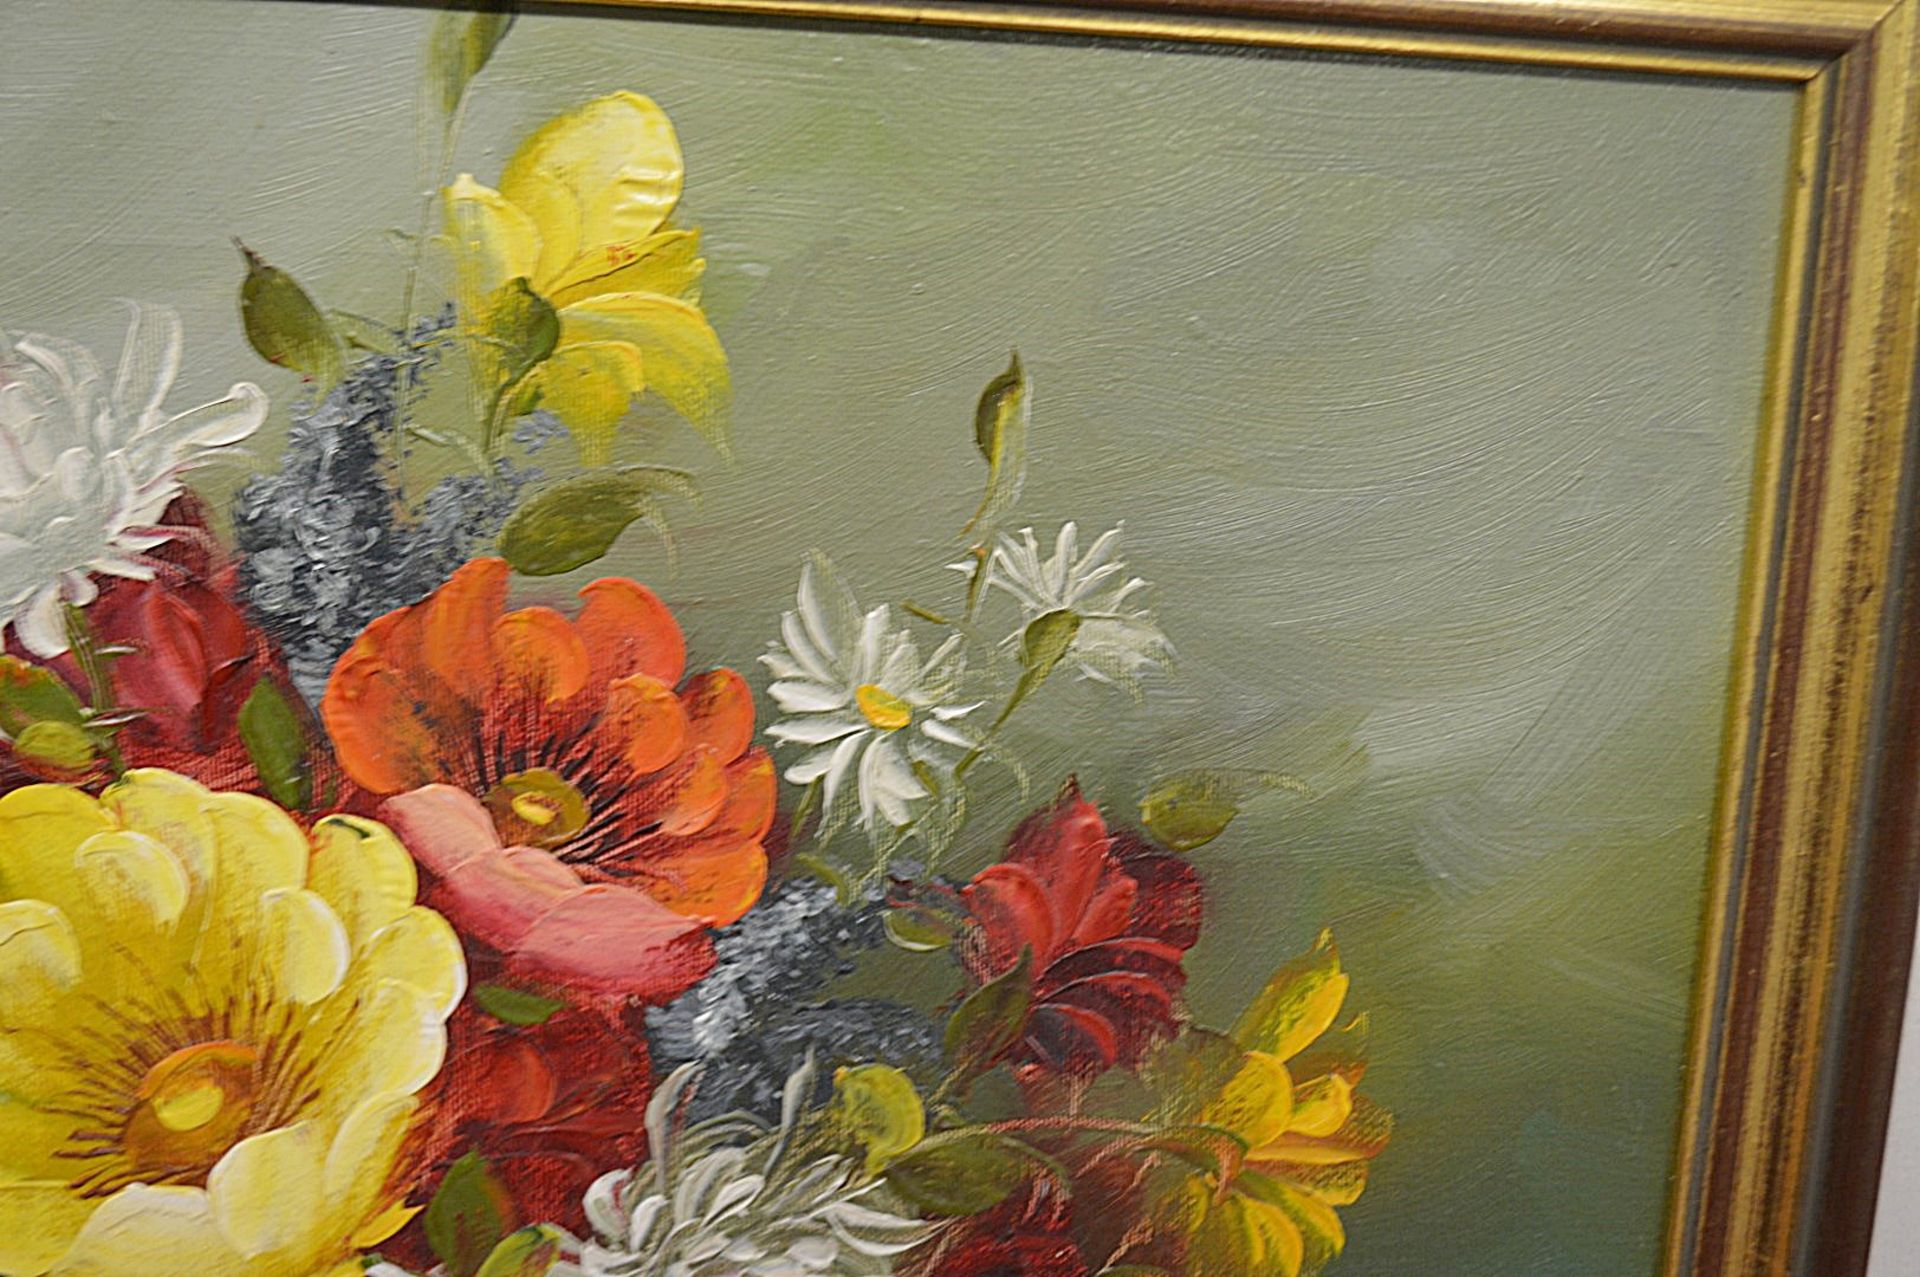 1 x Original Oil Painting Of Flowers On Canvas - Signed By The Artist - Dimensions: 36 x 46cm - Ref: - Image 3 of 6